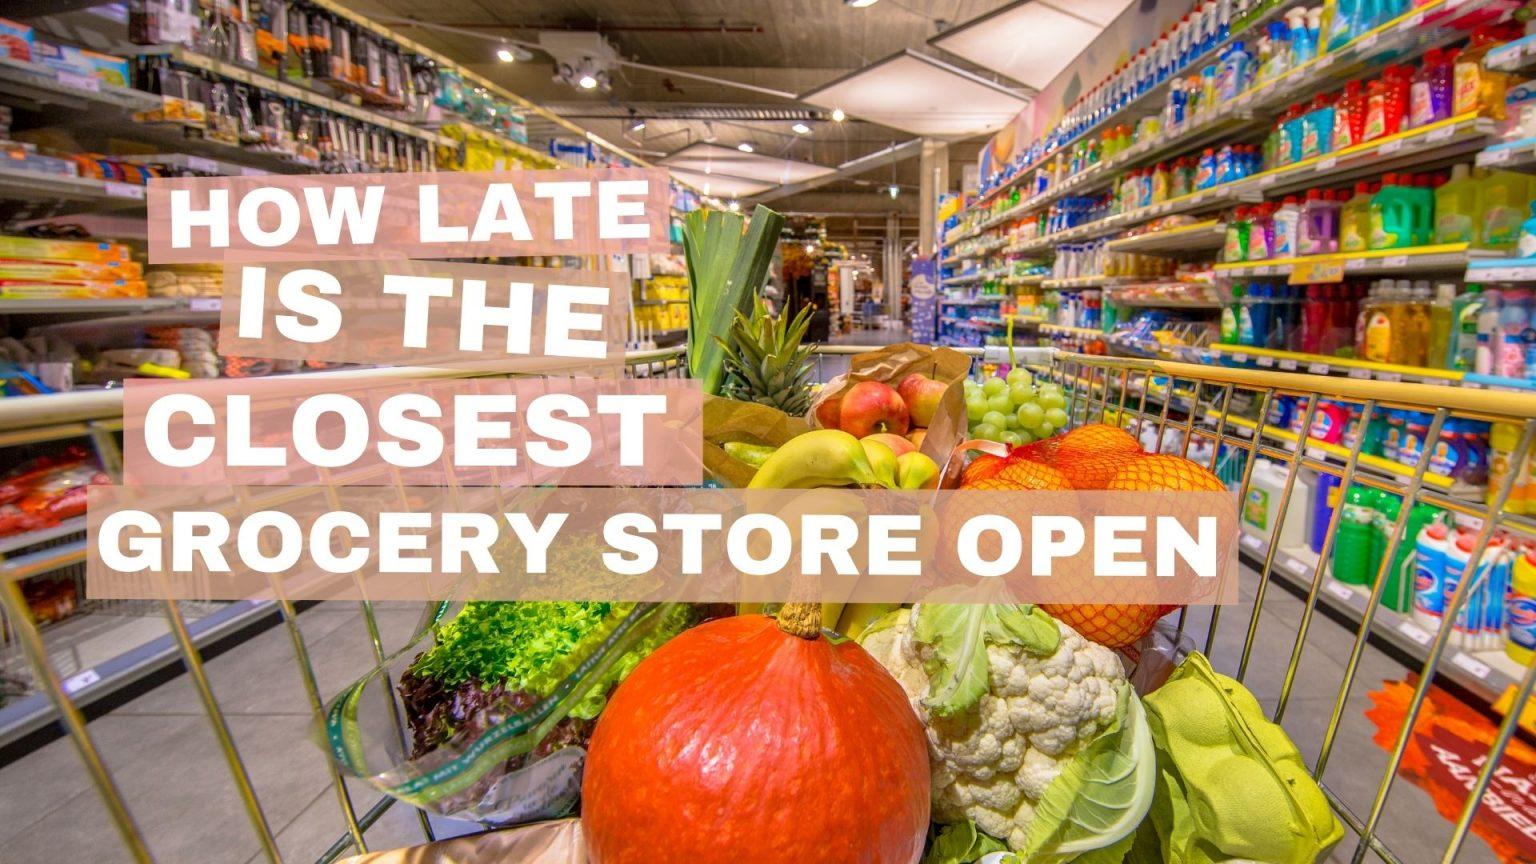 How late is The Closest Grocery Store Open now